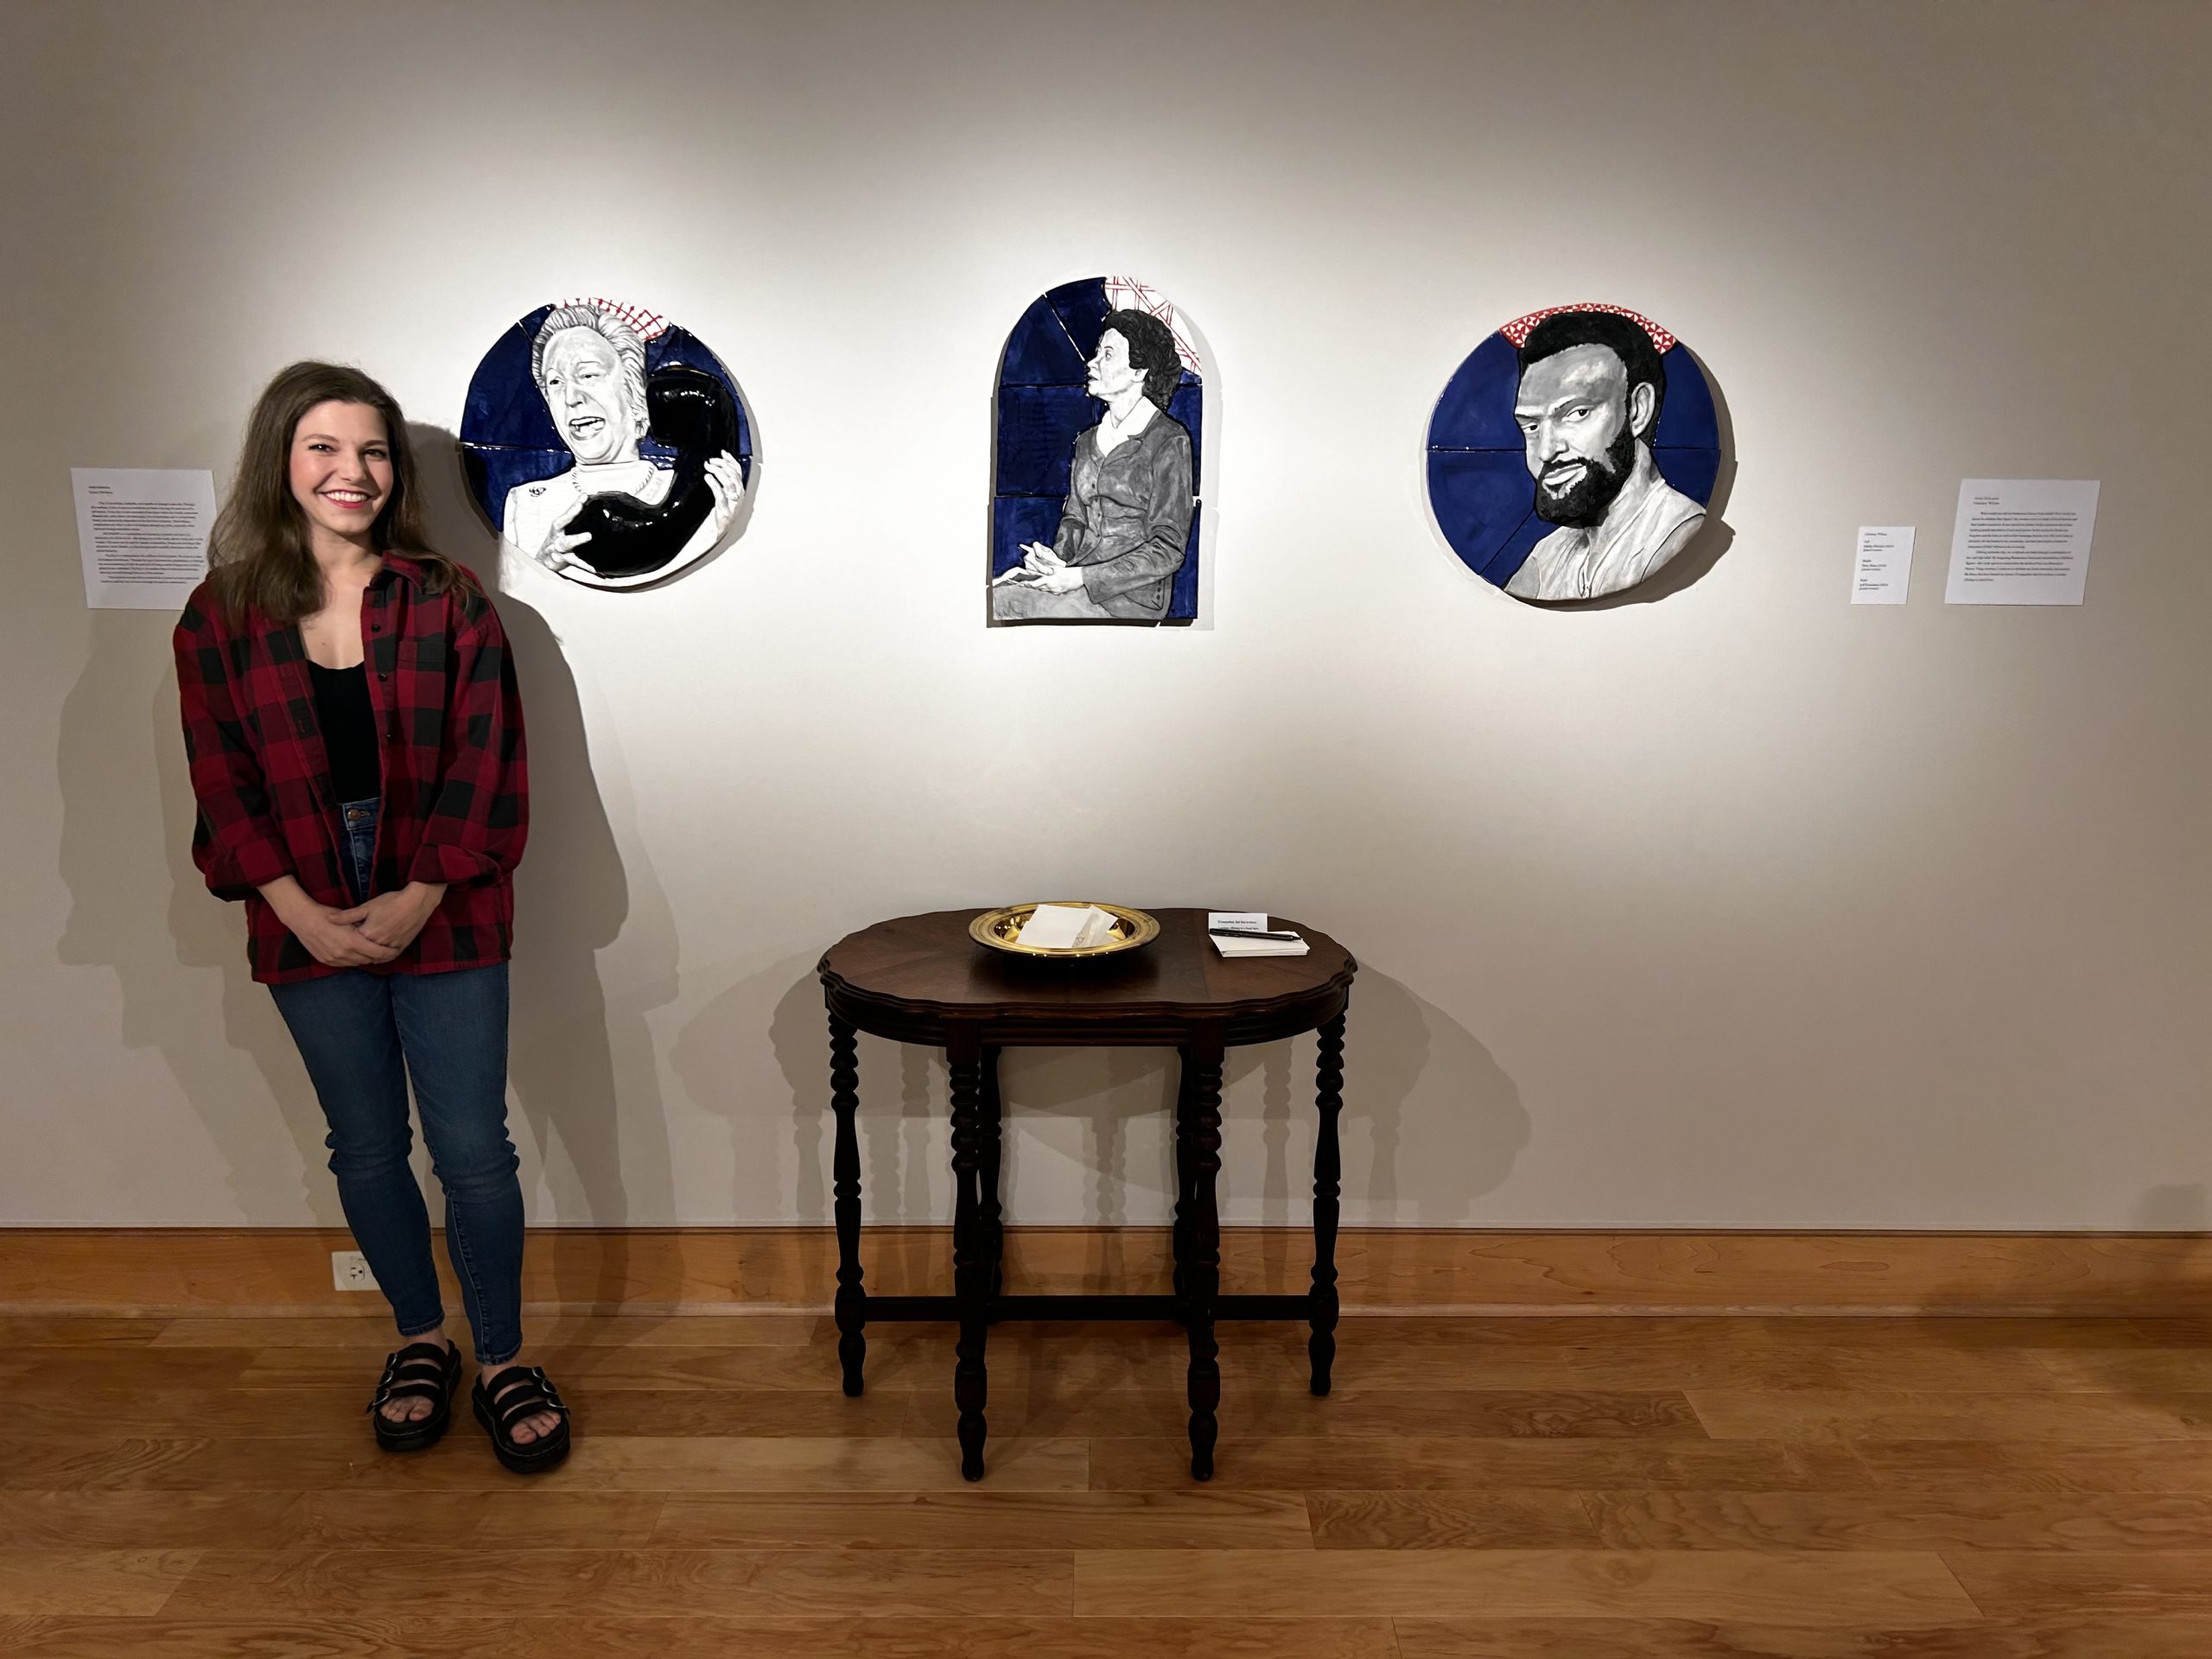 Courtney Wilson, a member of the new cohort of artLAUNCH recipients at UA Little Rock, is shown with some of her artwork.